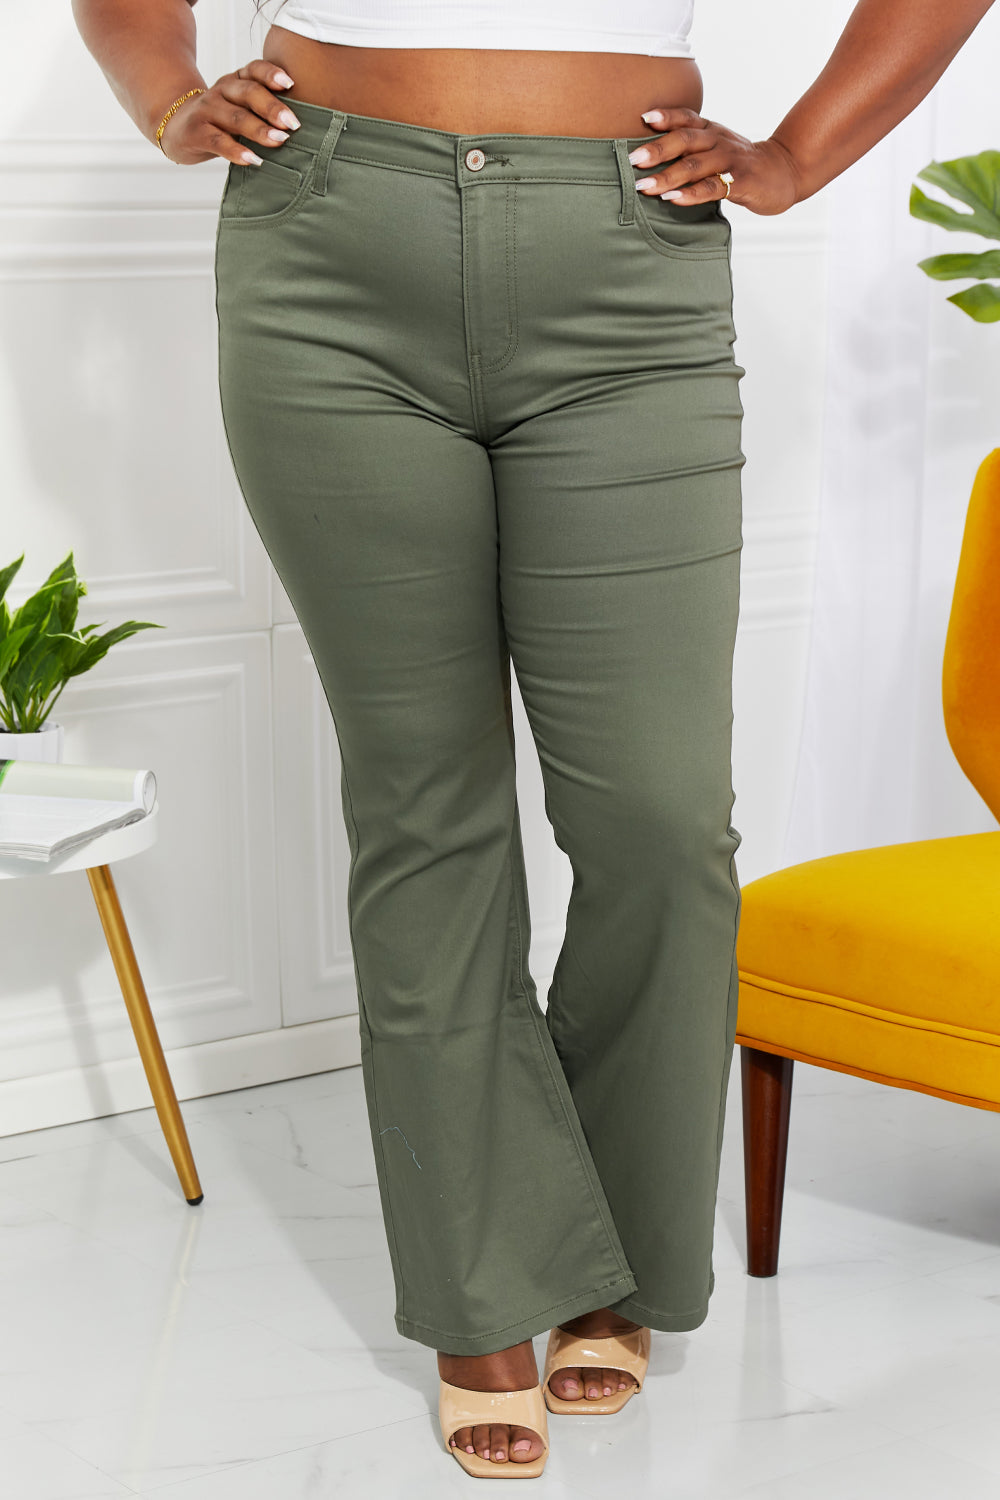 Zenana Clementine Full Size High-Rise Bootcut Jeans in Olive-Authentically Radd Women's Online Boutique in Endwell, New York